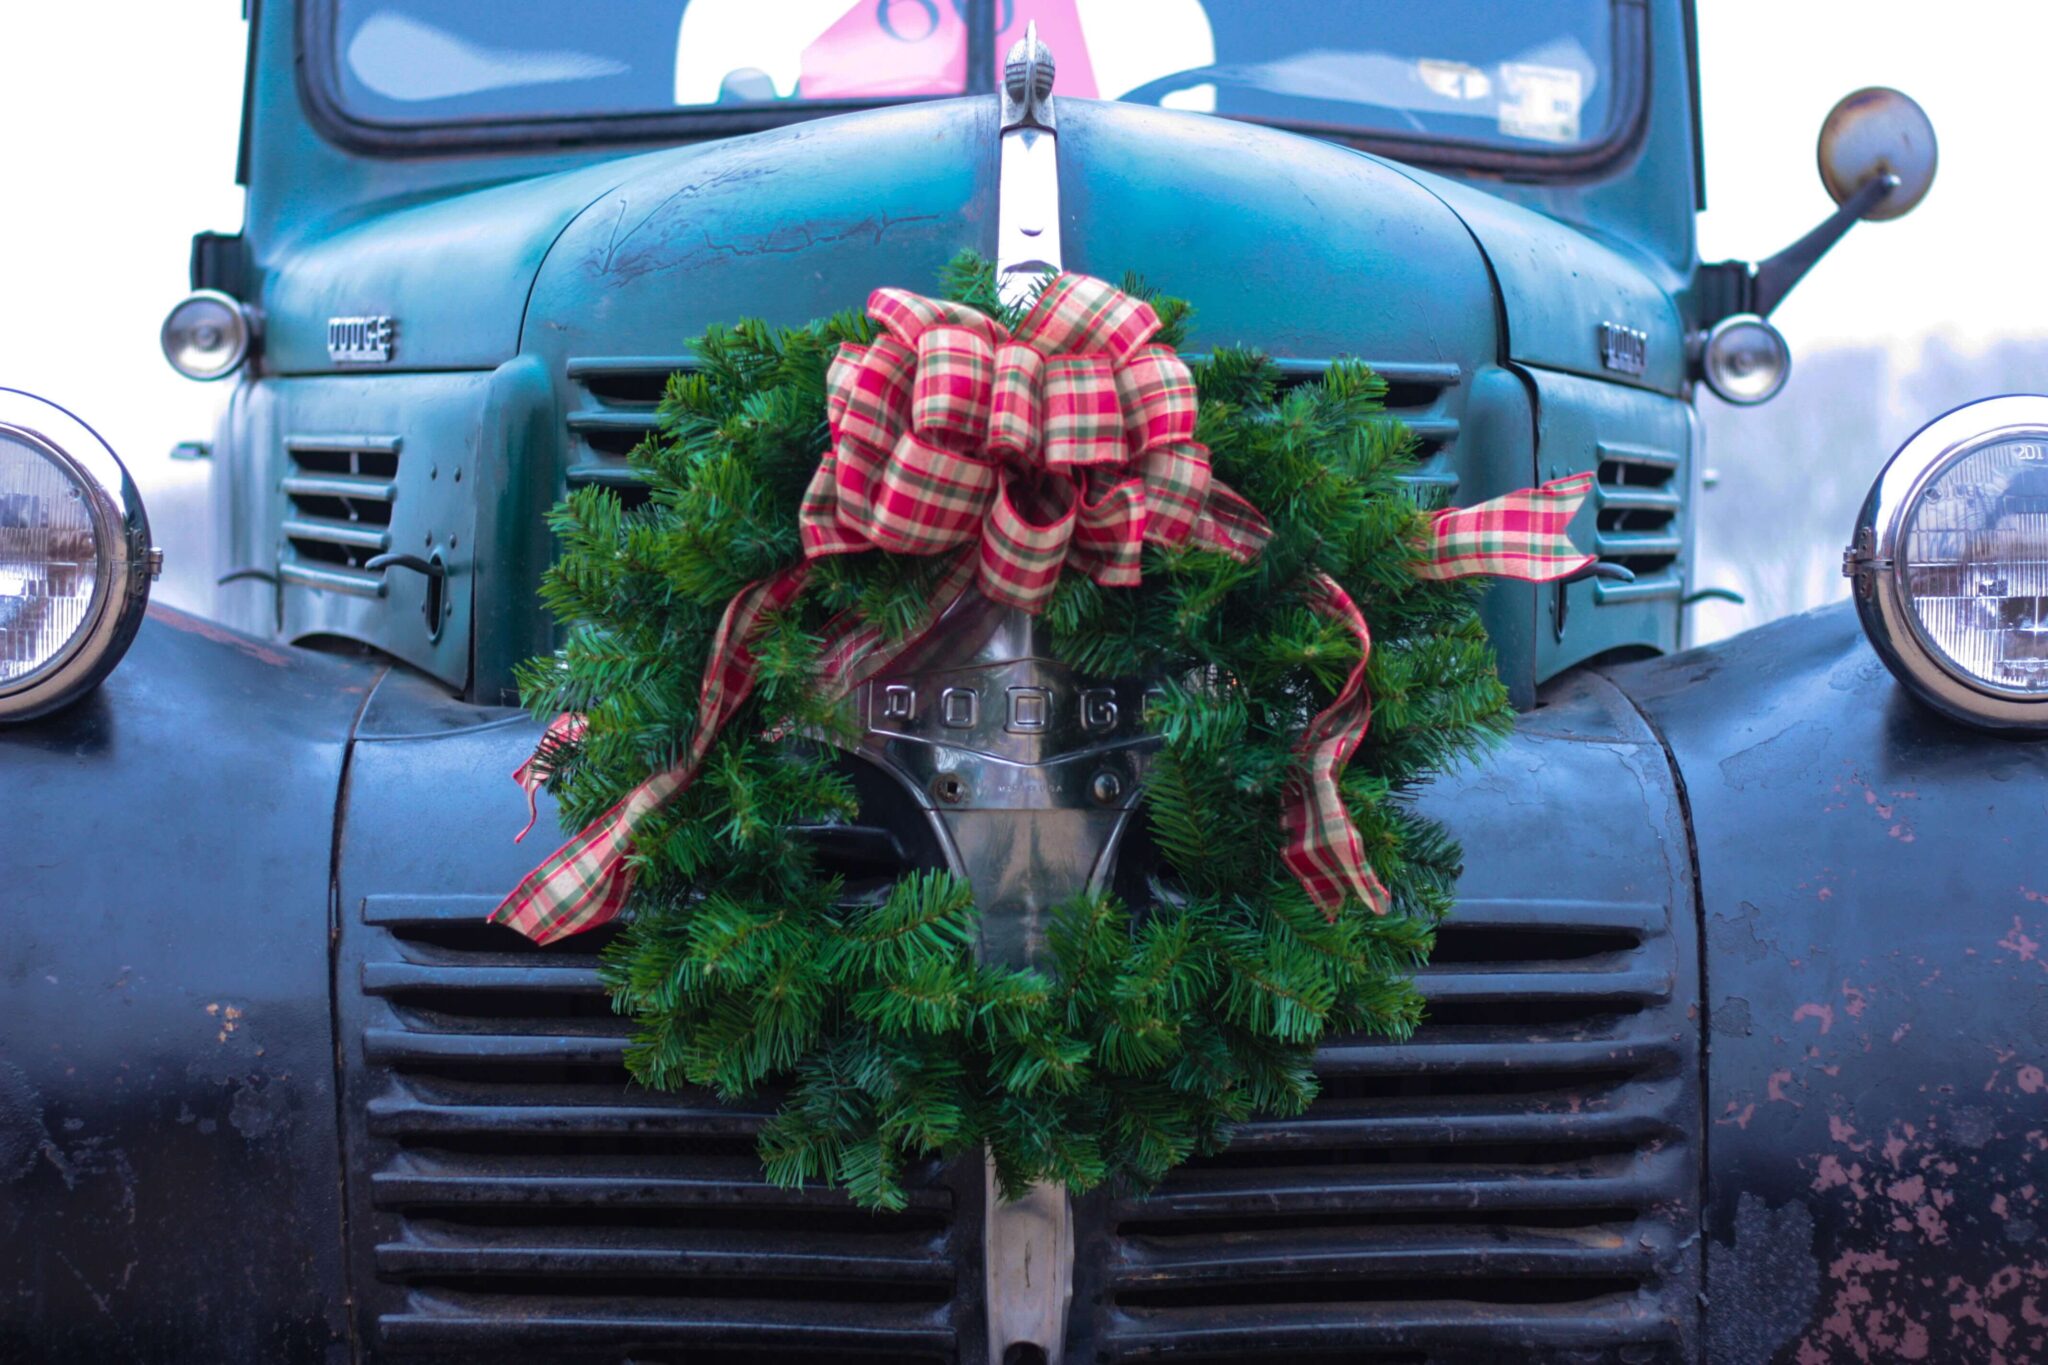 Wreath with red bow on the front of old-fashioned car.